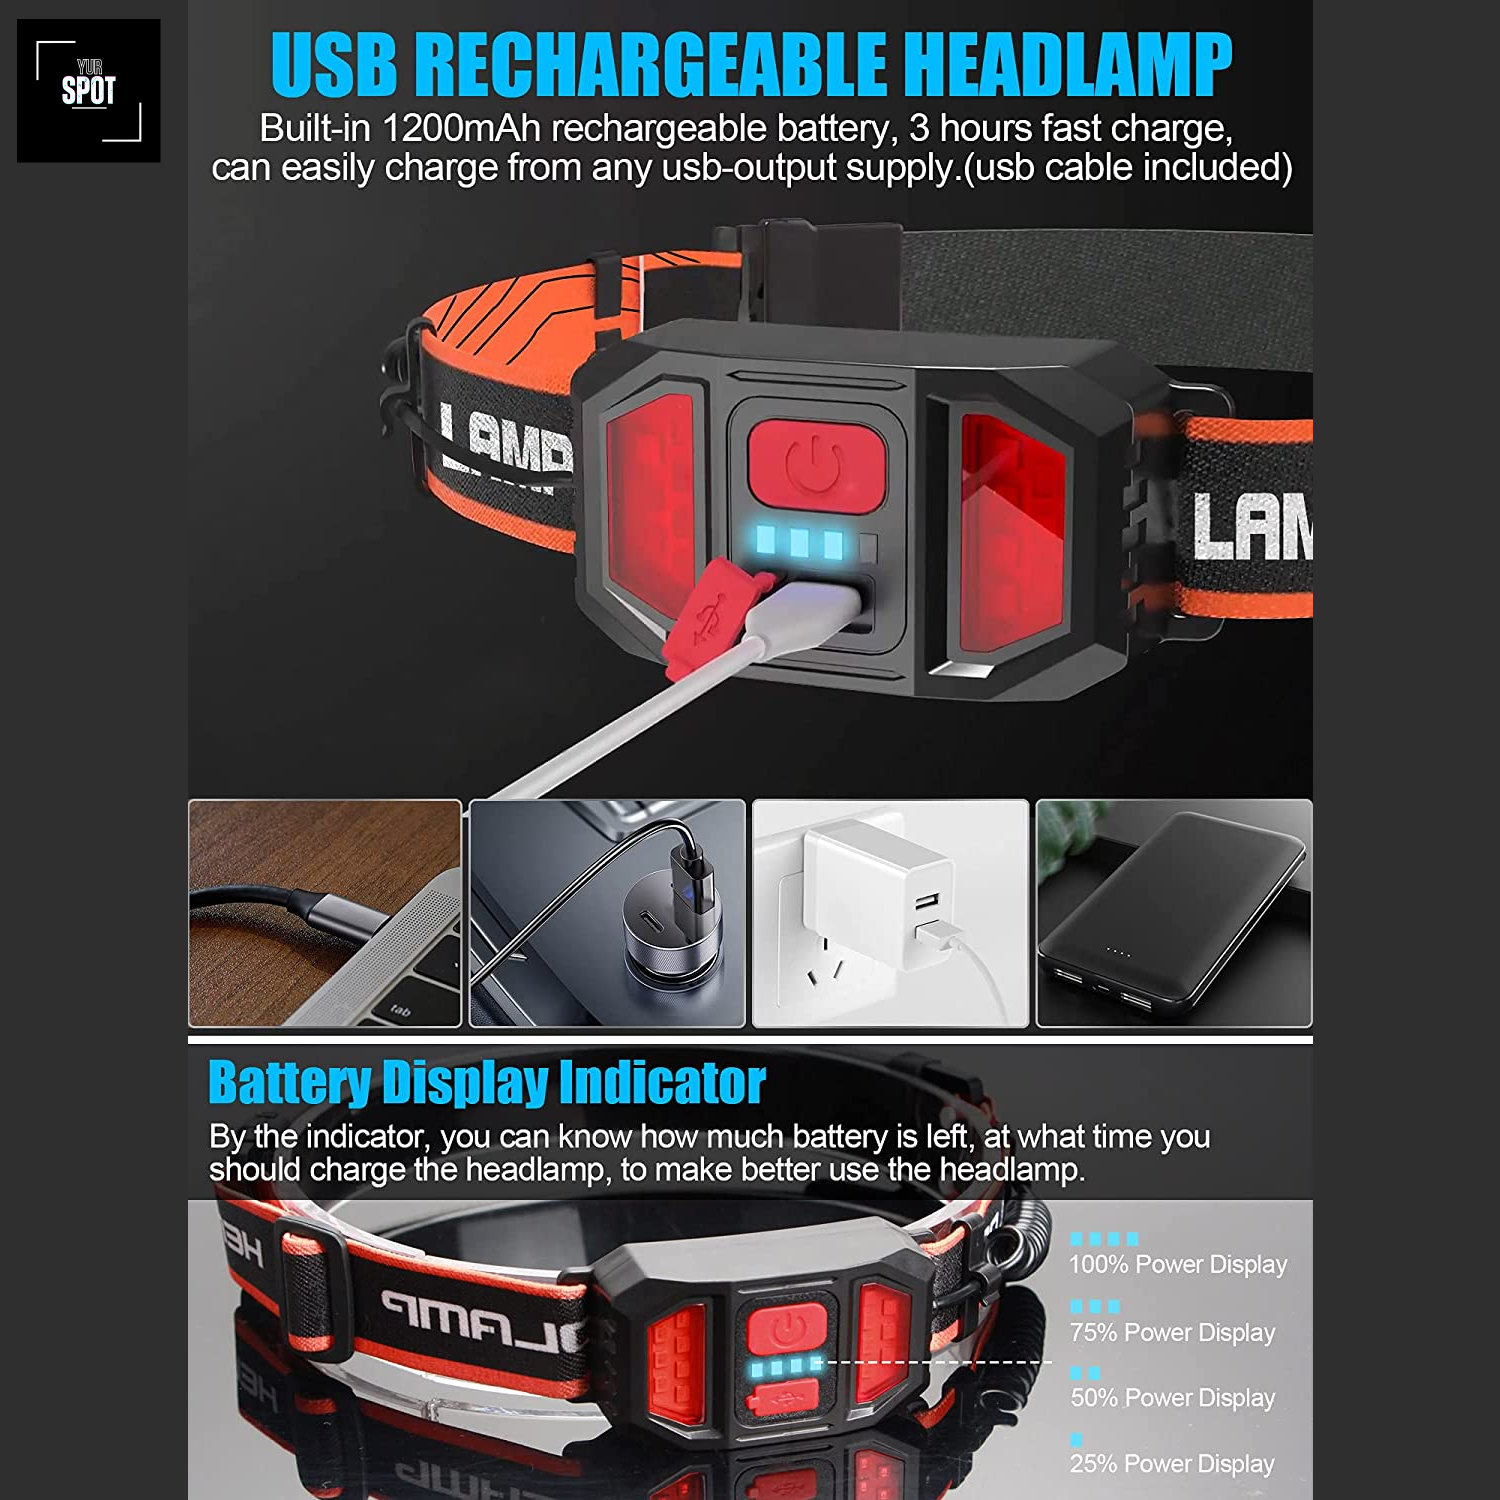 Construction Helmet-Compatible LED Headlamp - 1000 Lumens, 230° Wide Beam, USB Rechargeable, with Safety Red Taillight, Lightweight & Waterproof - Ideal for Site Work, Camping, and Hiking